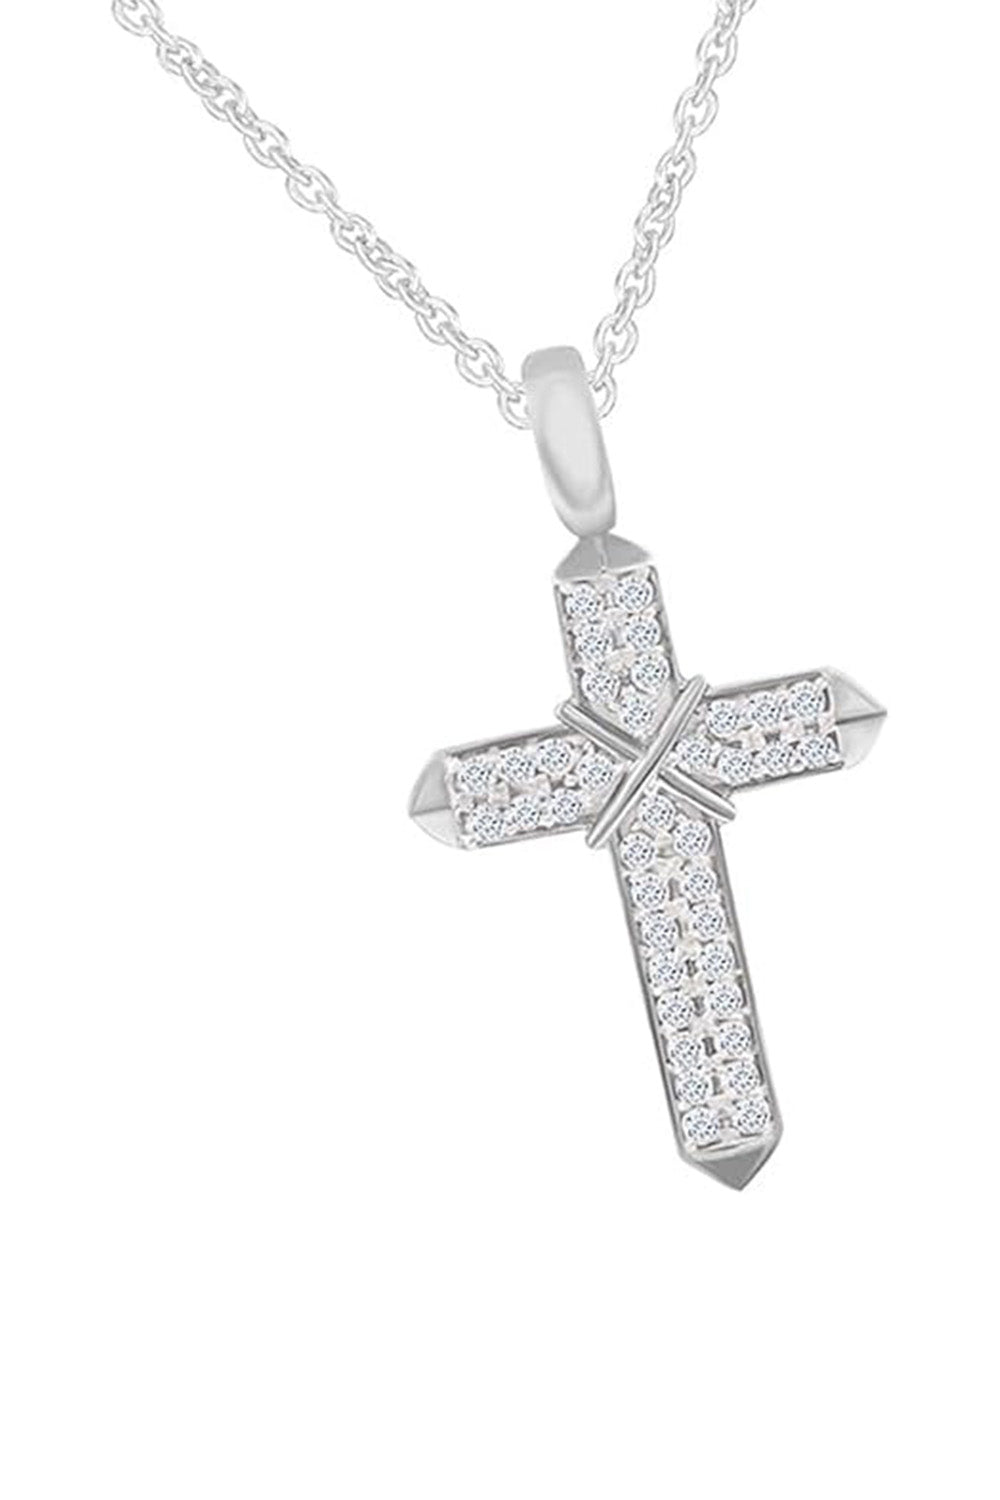 Moissanite Cross Pendant Necklace in 14K Gold Plated Sterling Silver Jewellery Gift for Birthday Christmas D Color, VVS1 0.12 Cttw.